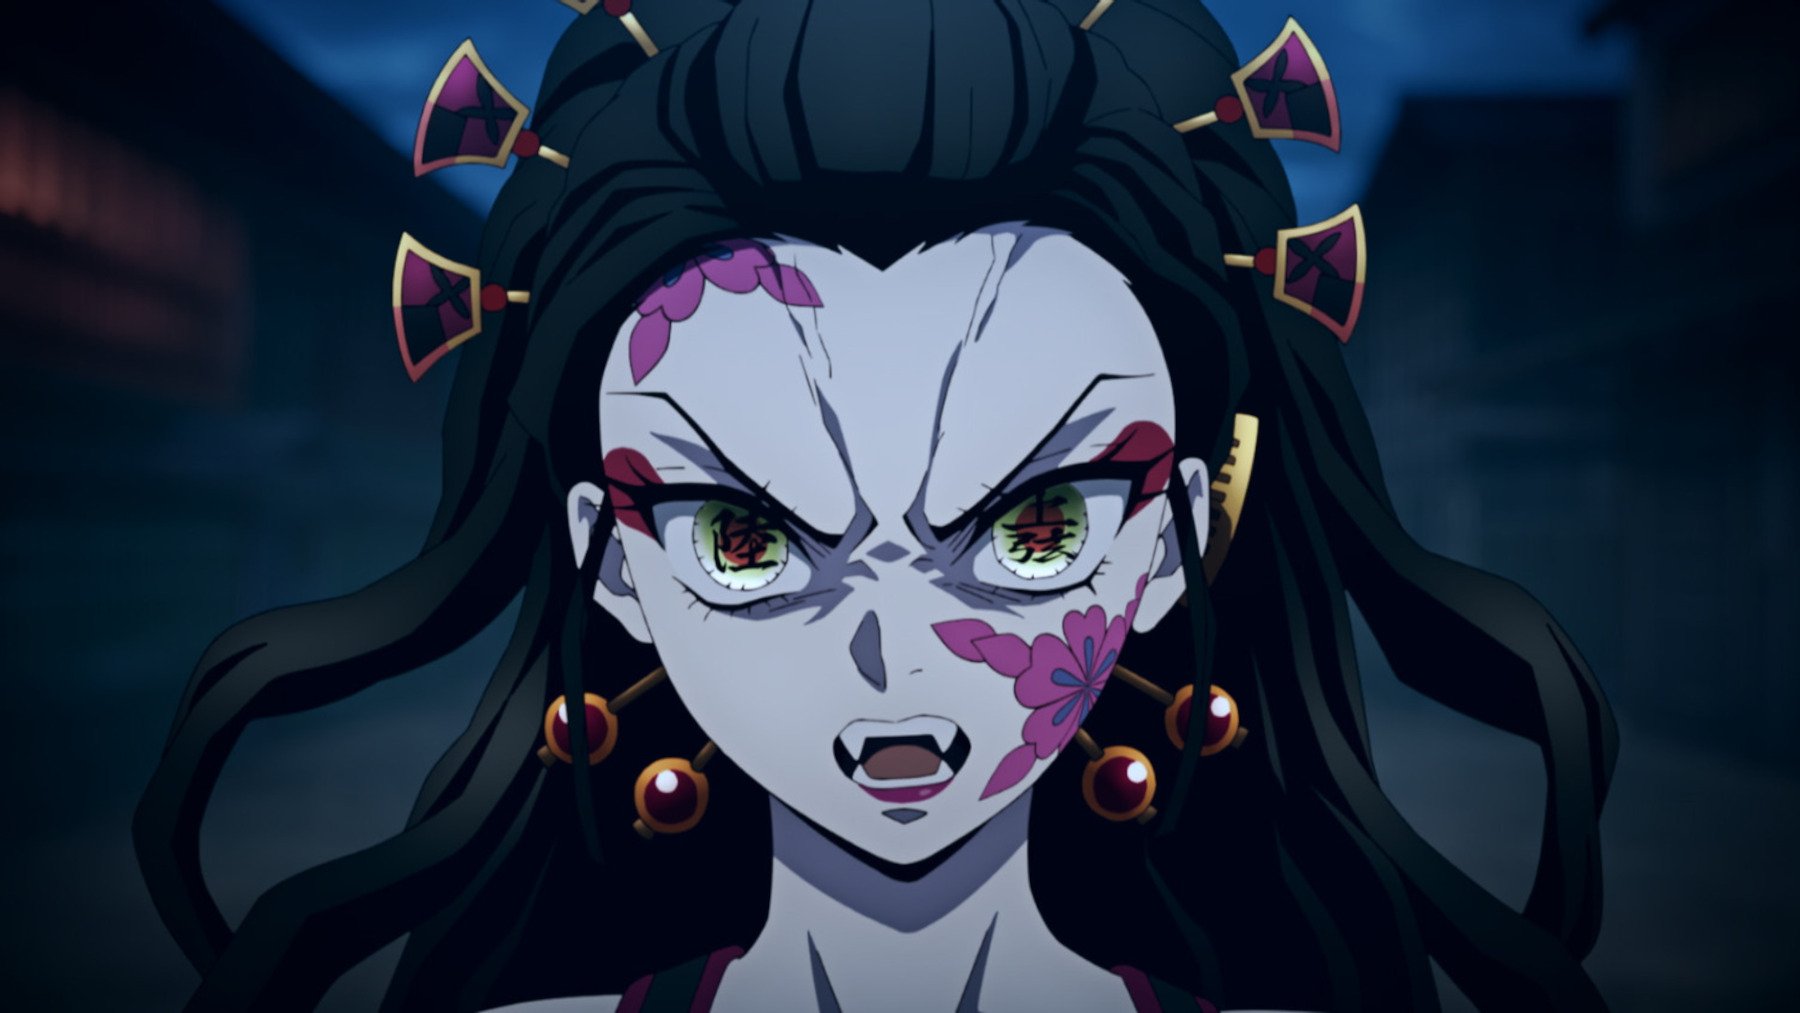 Upper Moon 6 demon Daki in 'Demon Slayer' Season 2's Entertainment District Arc. She has black hair and pink markings on her face.